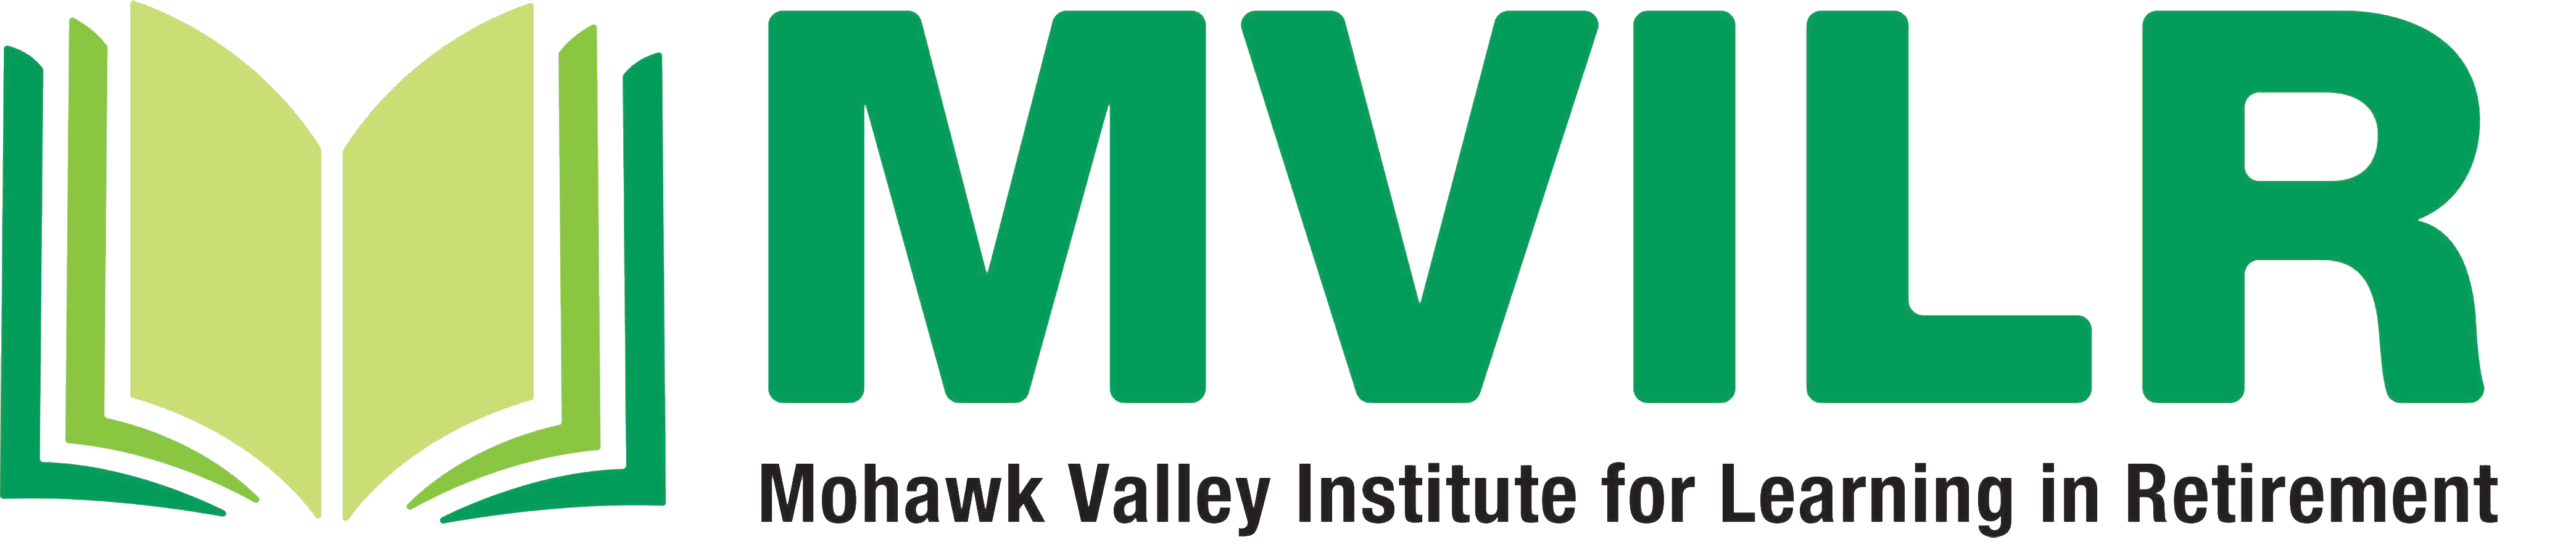 Mohawk Valley Institute for Learning in Retirement Fund